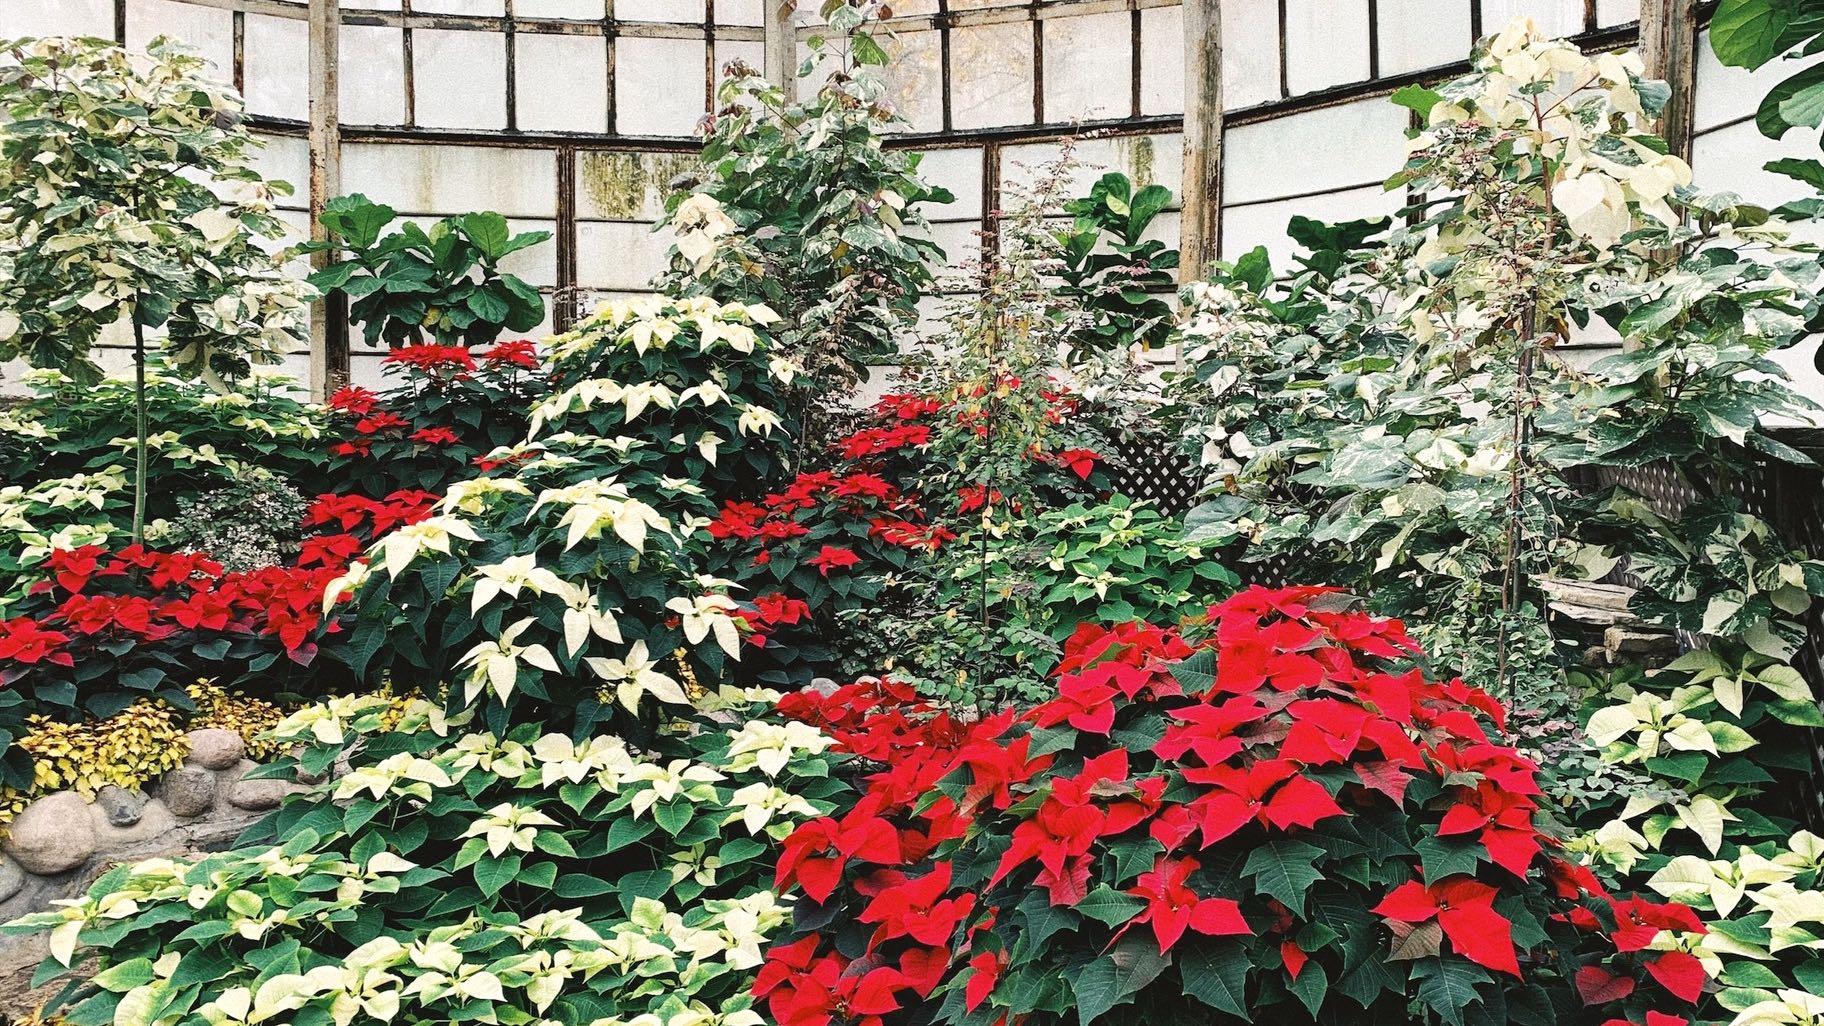 Lincoln Park Conservatory's annual winter flower show has a candy-cane theme of red and white poinsettias. (Lincoln Park Conservancy / Facebook)